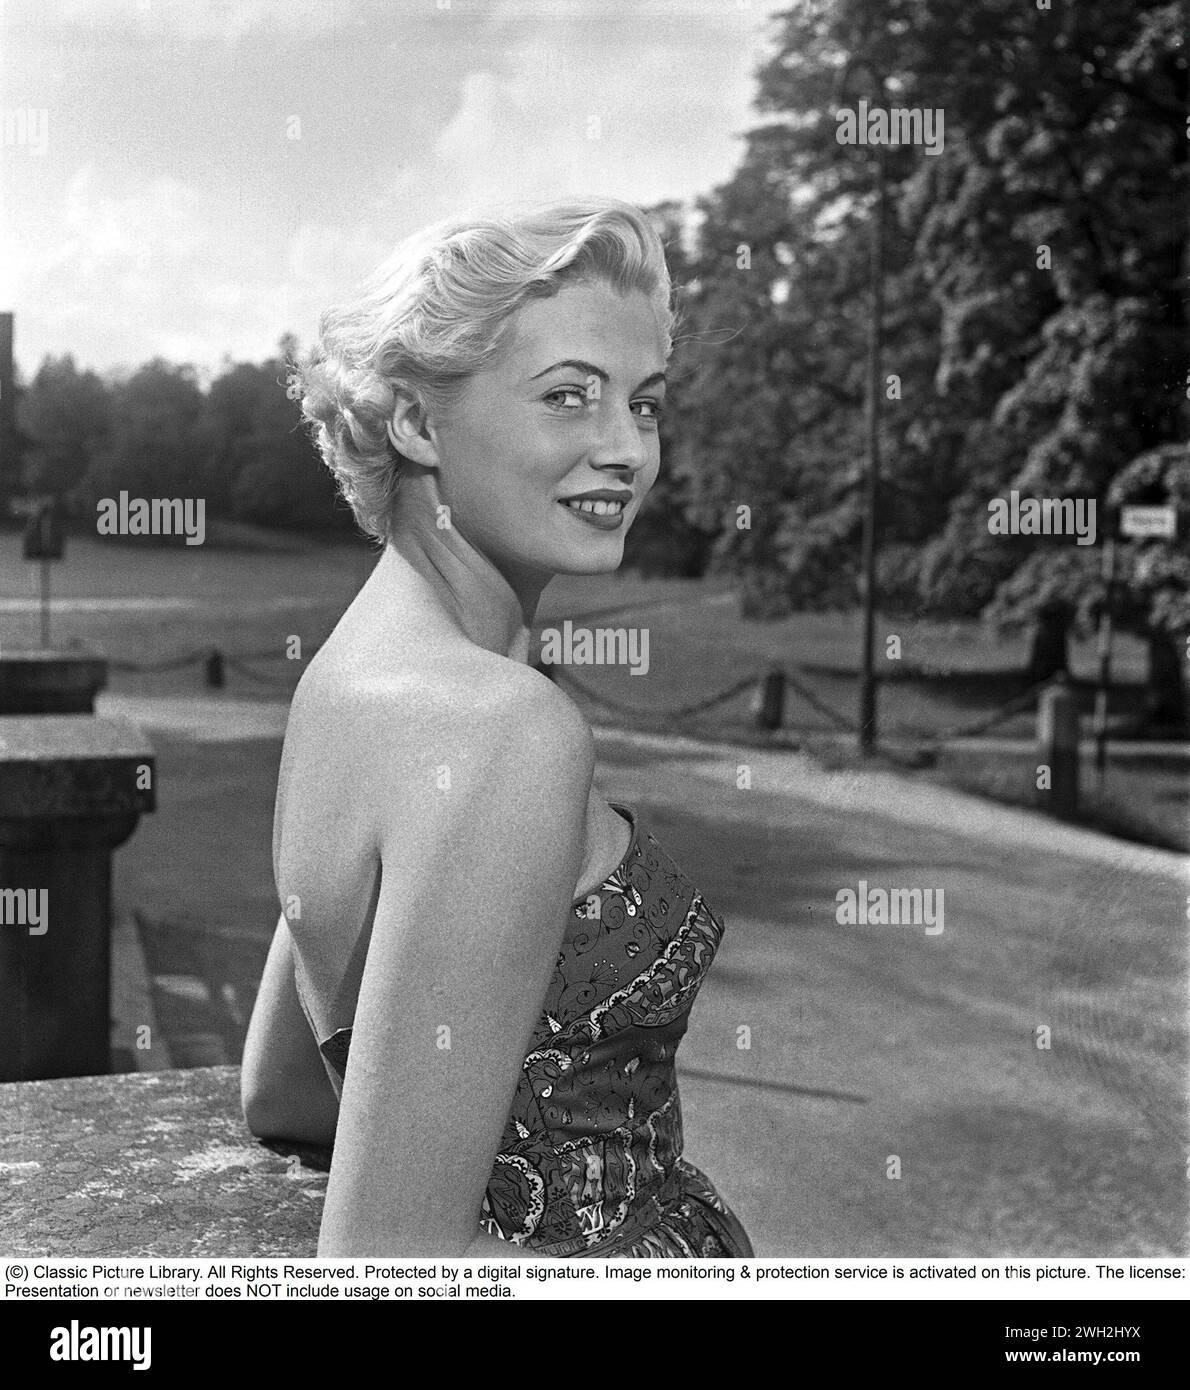 Anita Ekberg. Born 29 September 1931, died 11 January 2015. Swedish actress. When the picture is taken, she has won the Miss Sweden beauty contest on August 24, 1951. Anita has been awarded the title Miss Sweden through a vote in the weekly magazine Veckorevyn, where 1100 girls competed for the title in 28 Swedish cities and 125,000 voters. Along with the award, she also received a trip to the USA where she will visit the city of Atlantic City where Miss America is usually crowned, as well as Texas. She is 20 years old at this time, a native of Malmö and a model by profession. 1951. Kristoffer Stock Photo